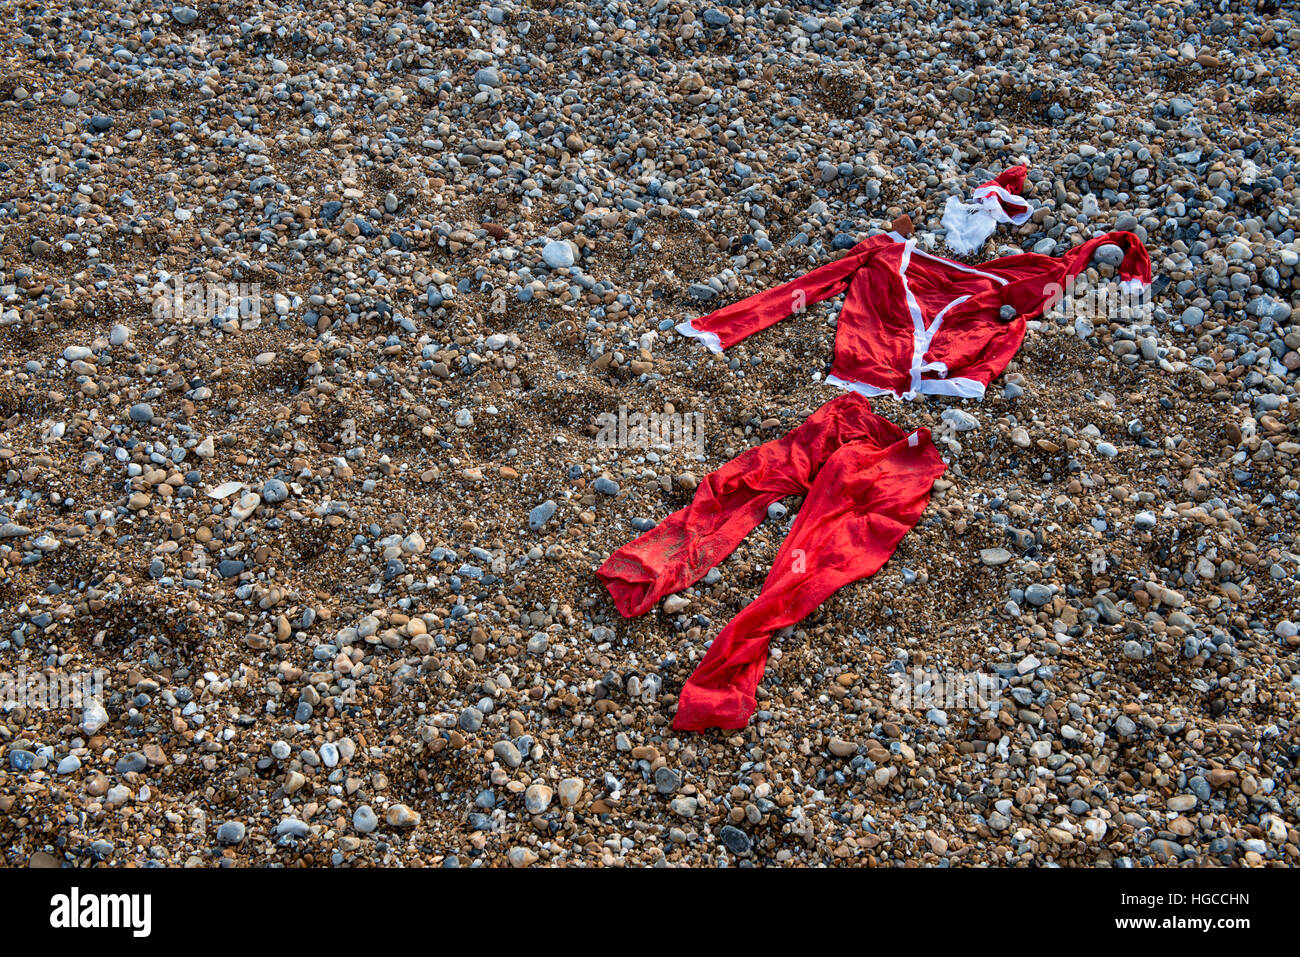 A discarded Santa suit on a pebble beach marks the end of Christmas Stock Photo